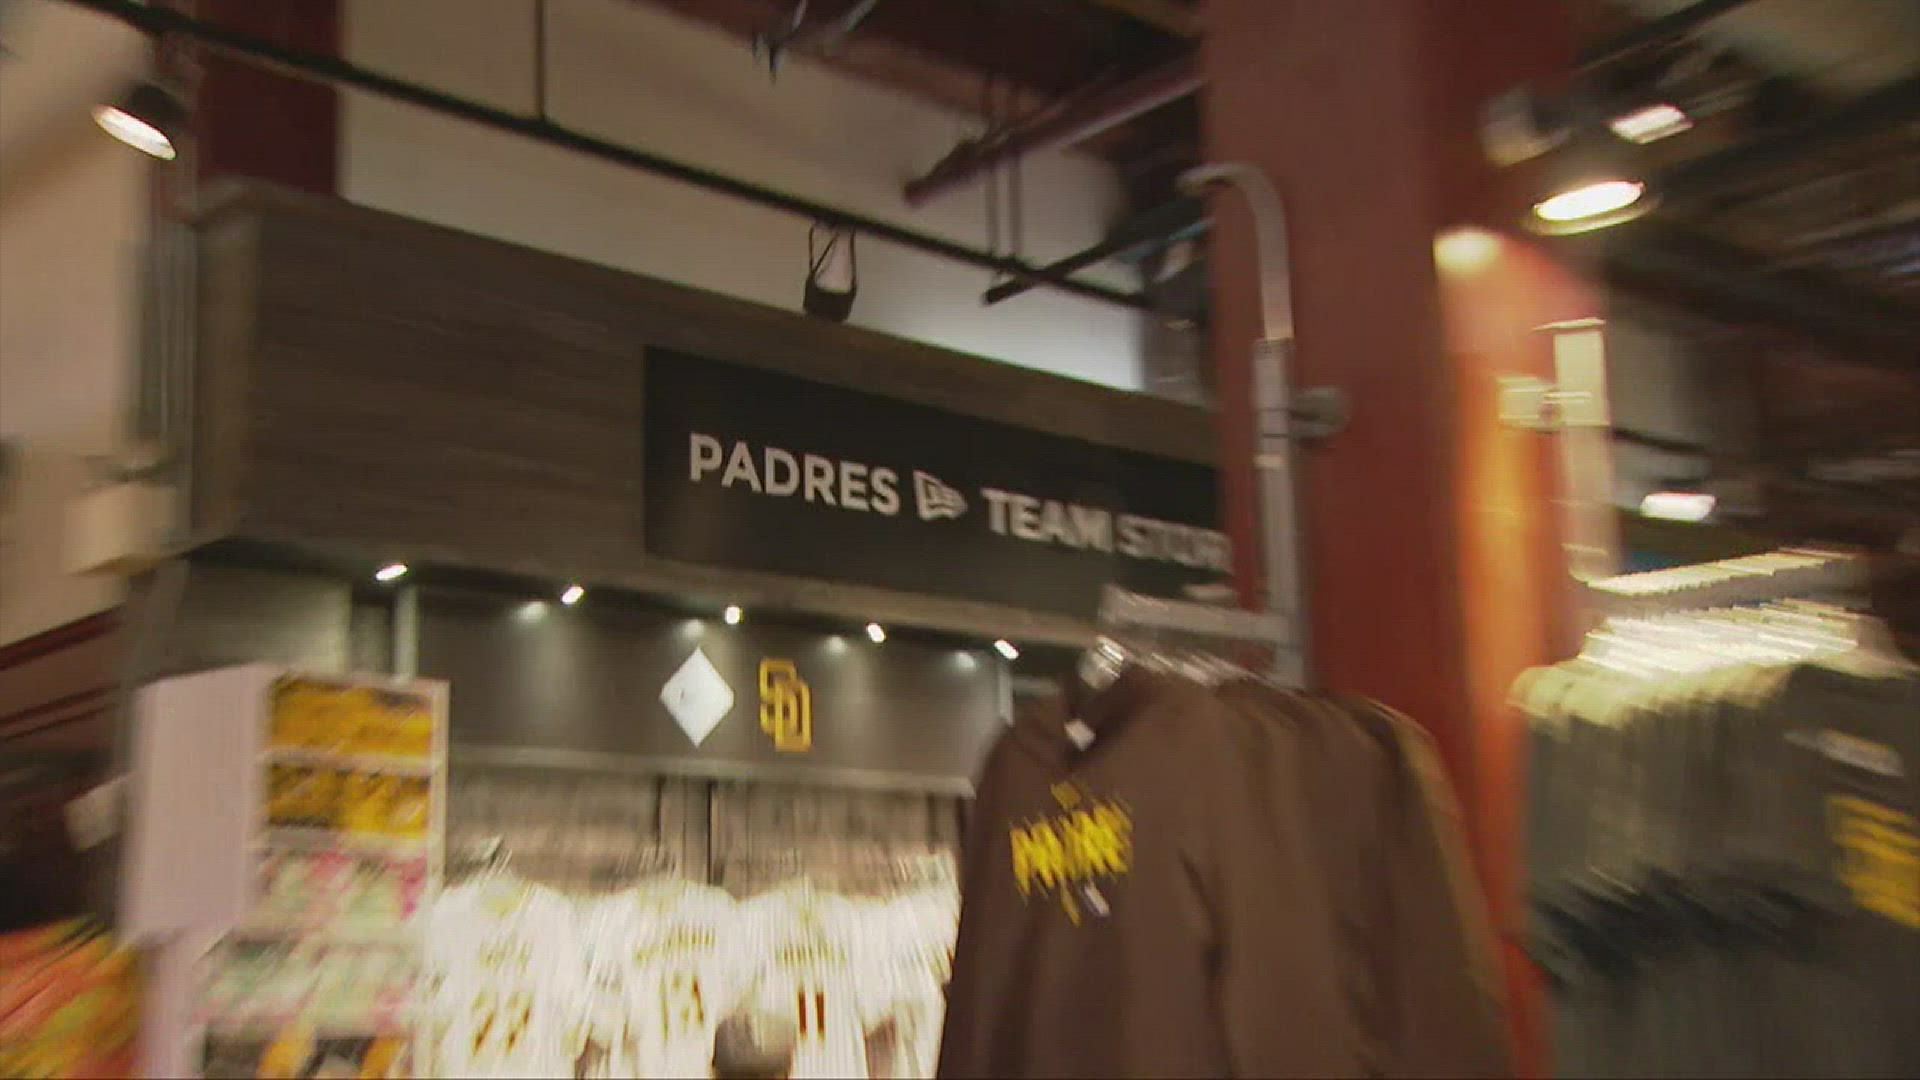 Sneak Peek at 2023 Padres gear and merchandise at the Downtown San Diego team store.